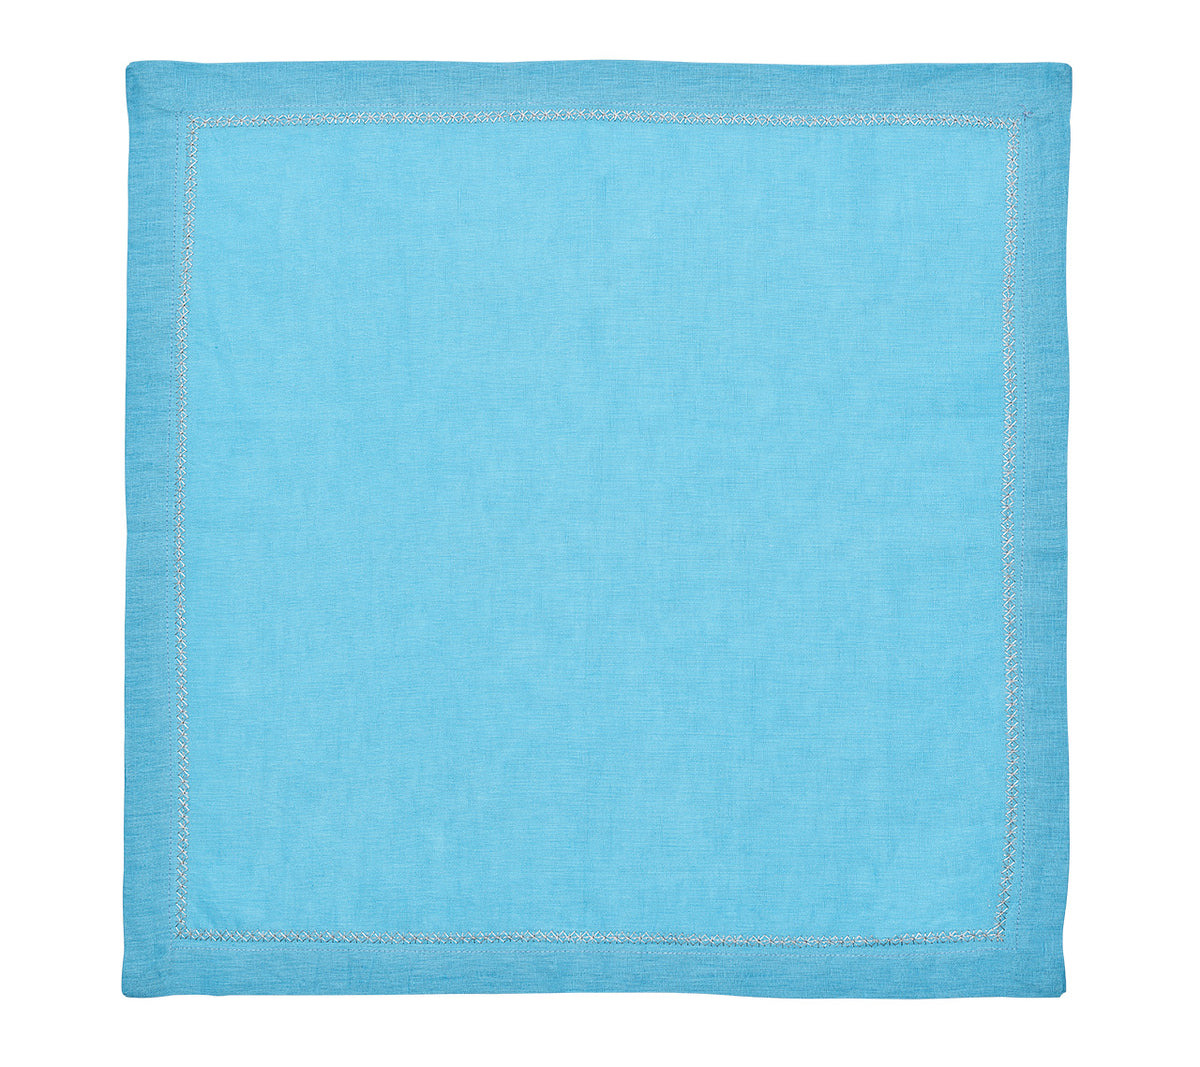 Classic Napkin in Turquoise, Set of 4